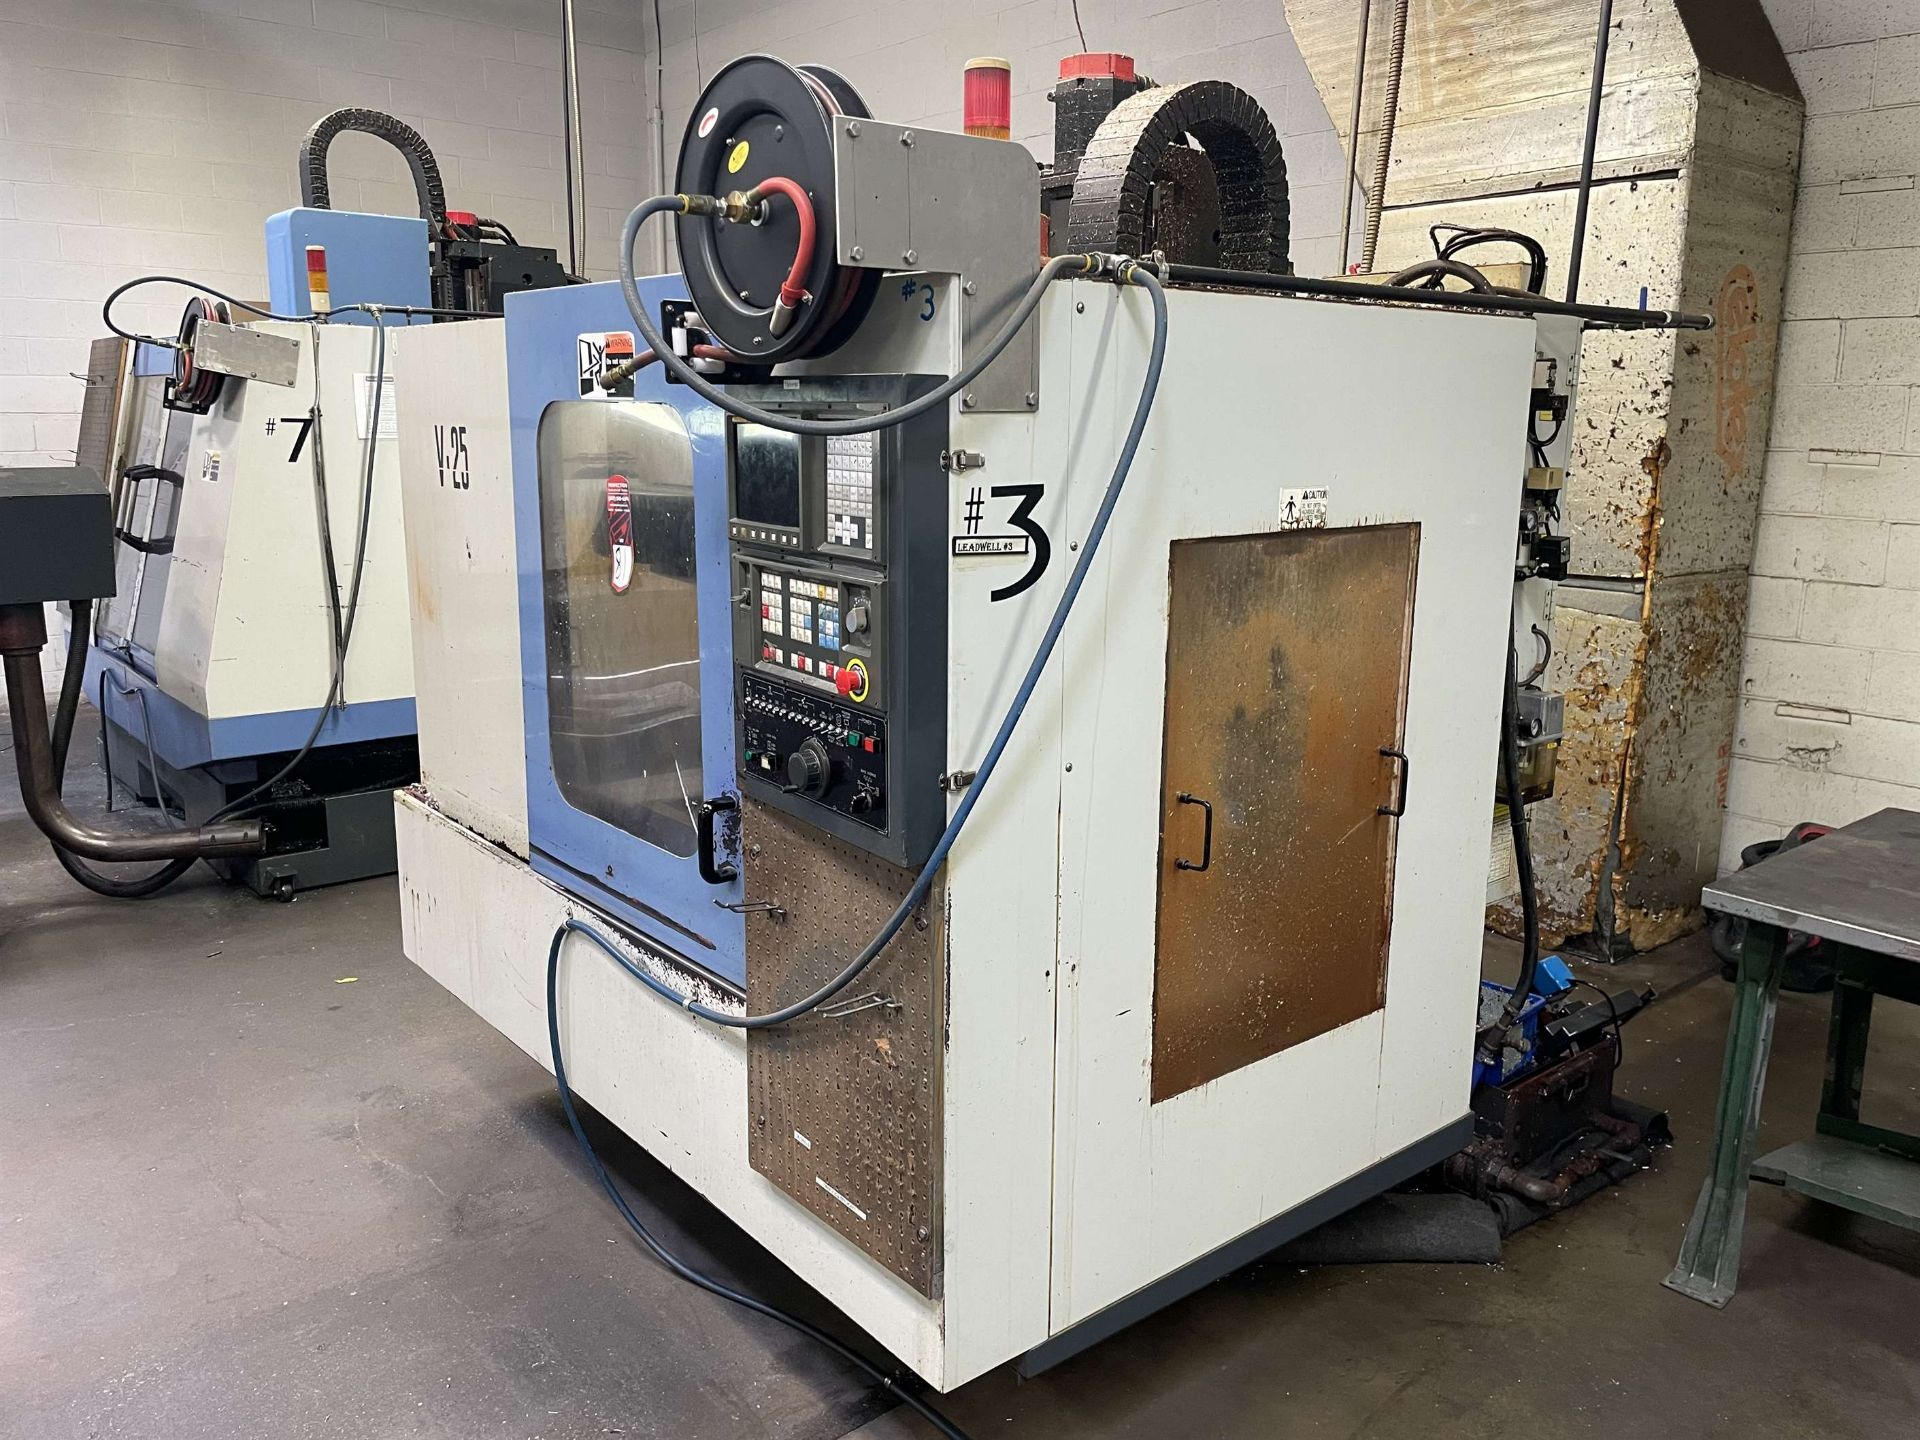 LEADWELL V-25 Vertical Machining Center, s/n L1SIG0331, w/ FANUC 21-M Control, 15” x 30” Table, BT30 - Image 2 of 8